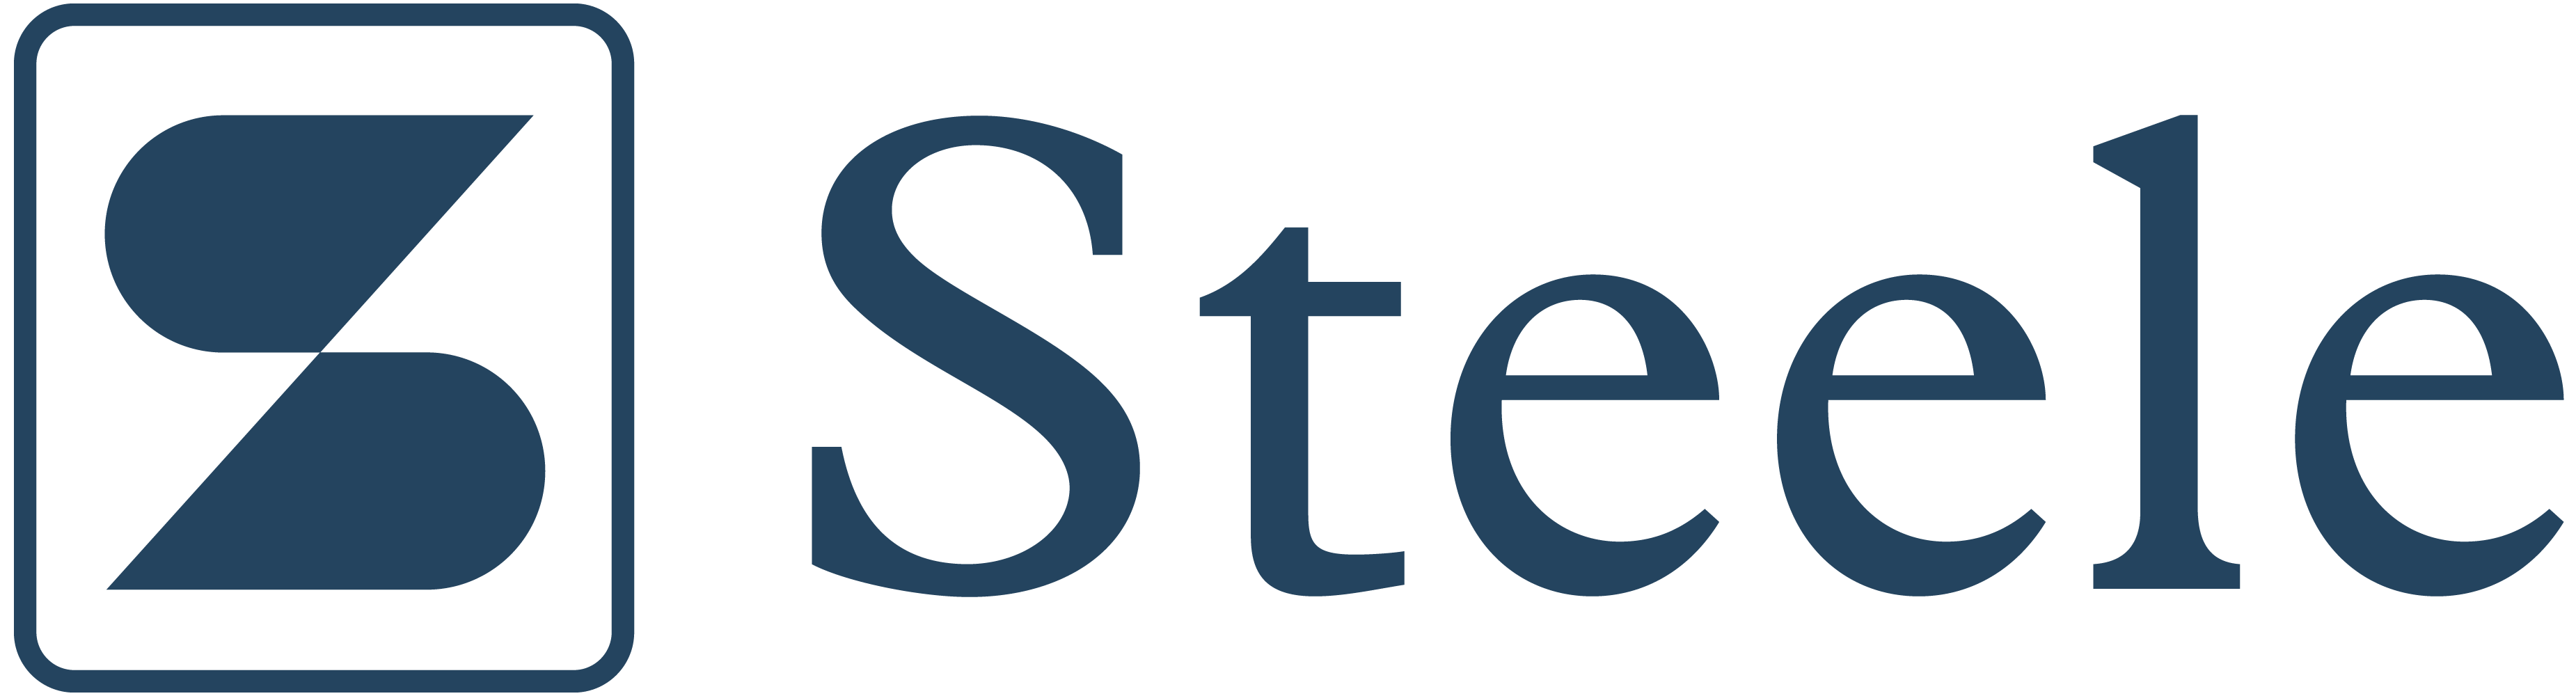 Compliance Wave Joins Steele Compliance Solutions